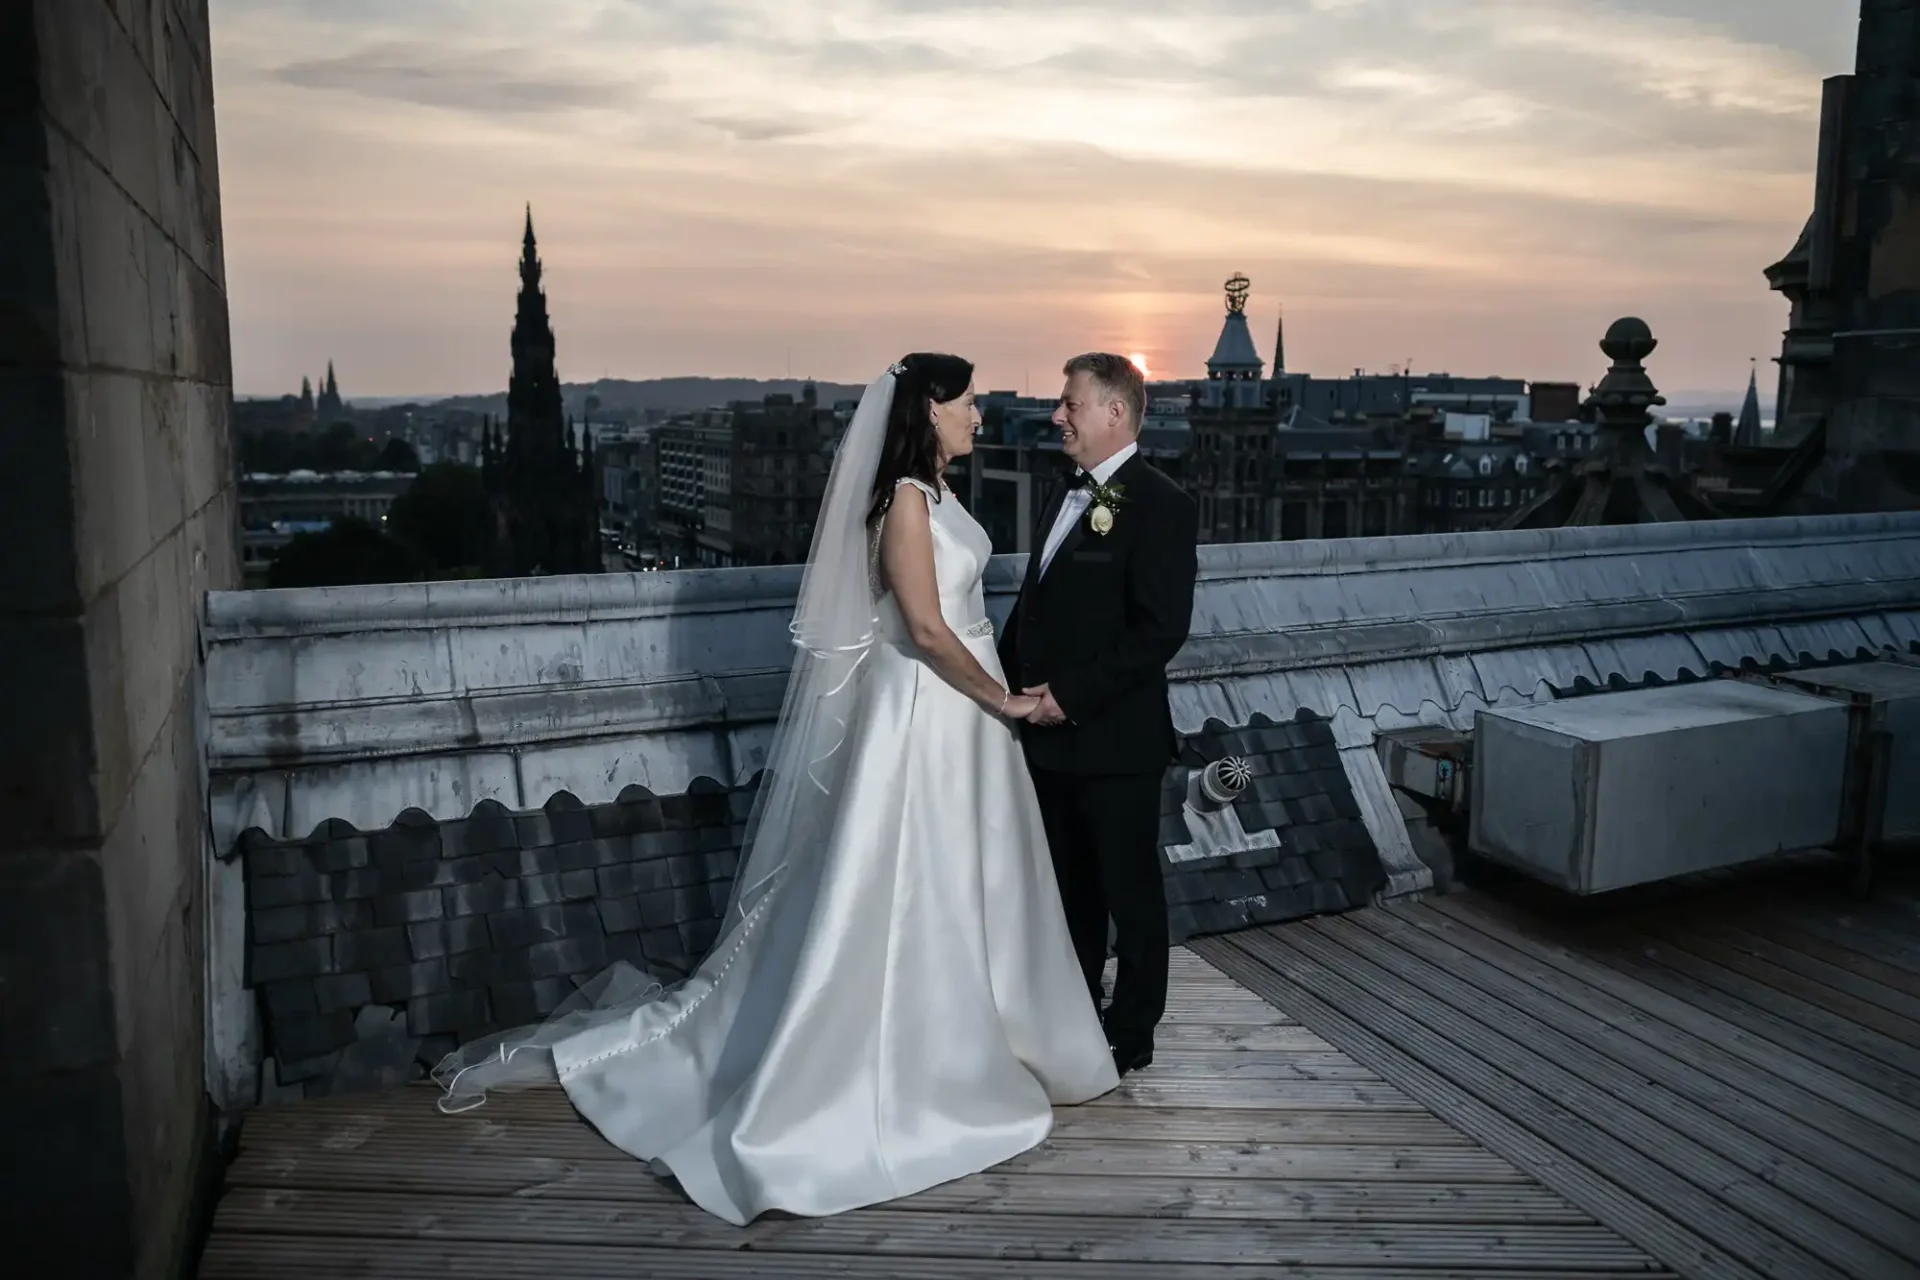 A bride and groom holding hands on a rooftop at dusk, with a cityscape in the background.